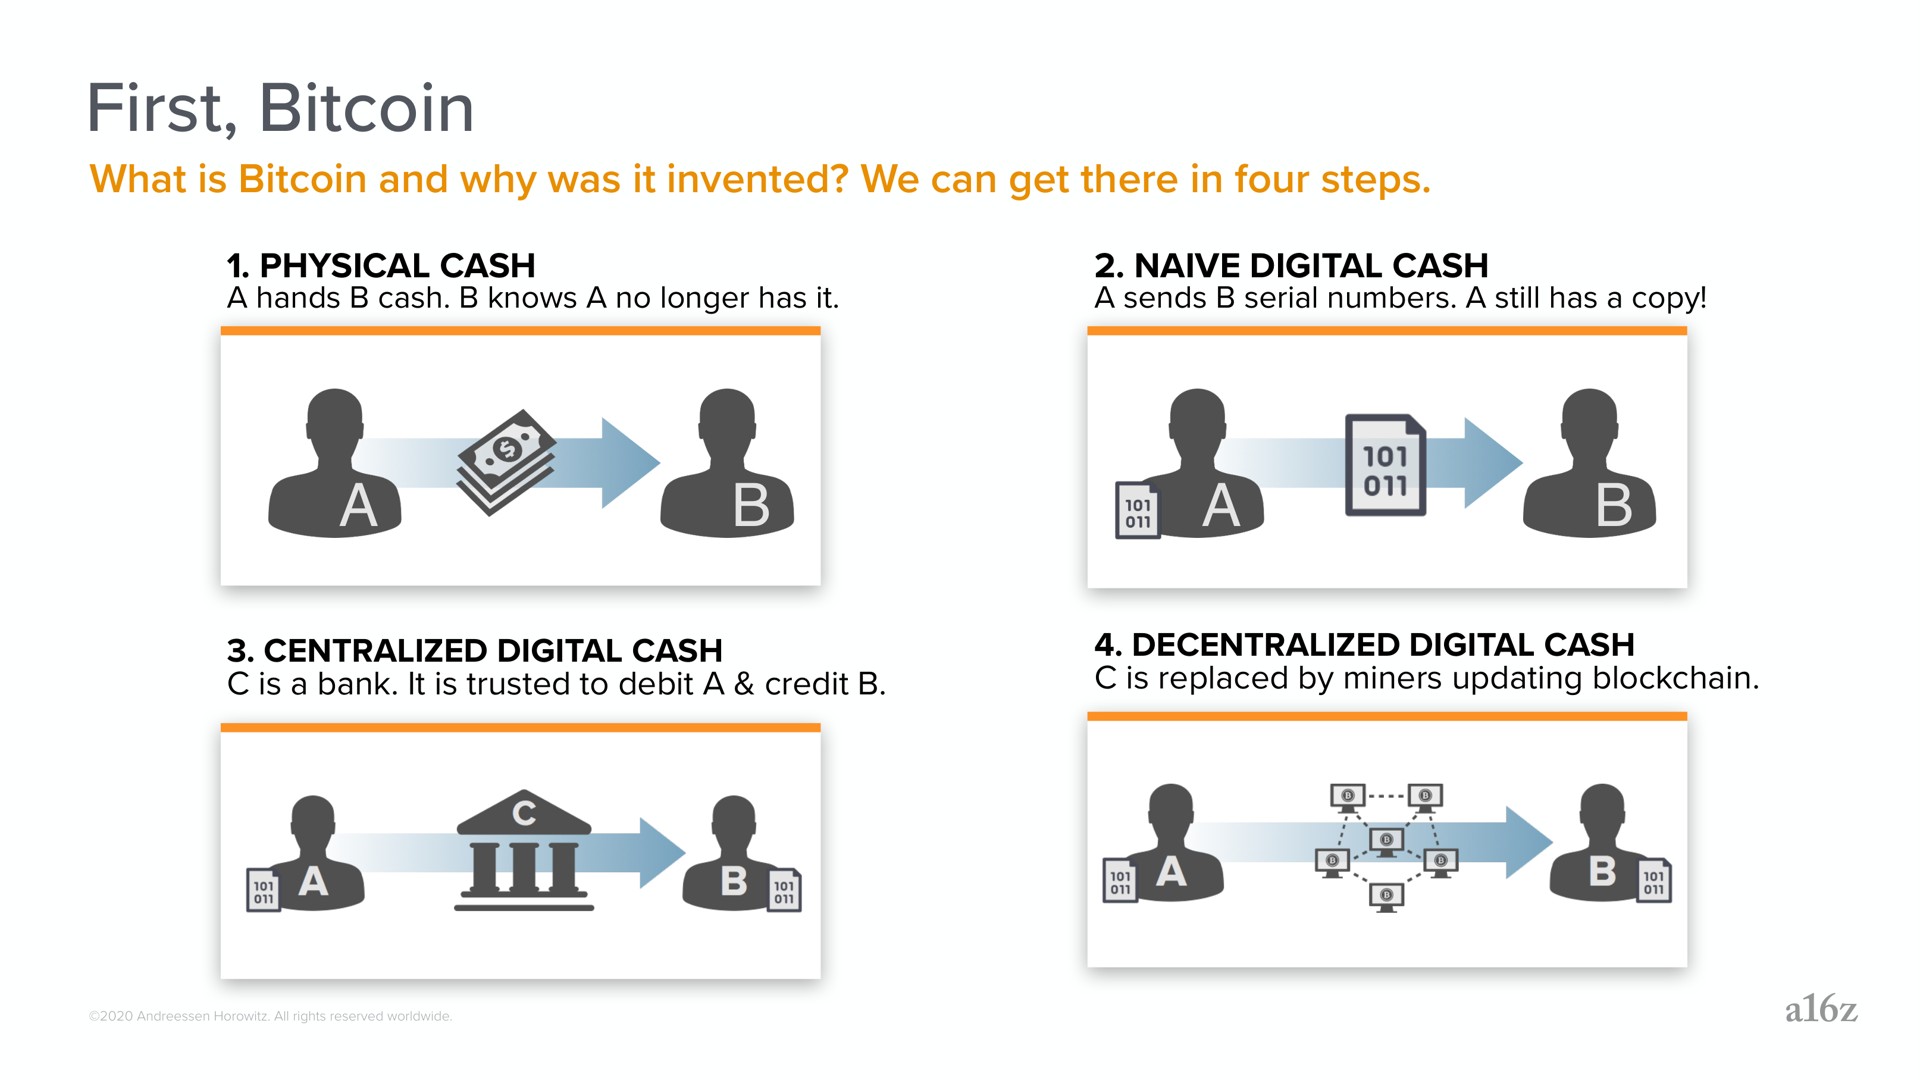 first what is and why was it invented we can get there in four steps a a physical cash hands cash knows no longer has naive digital cash sends serial numbers still has copy i centralized digital cash bank trusted to debit credit decentralized digital cash replaced by miners updating | a16z